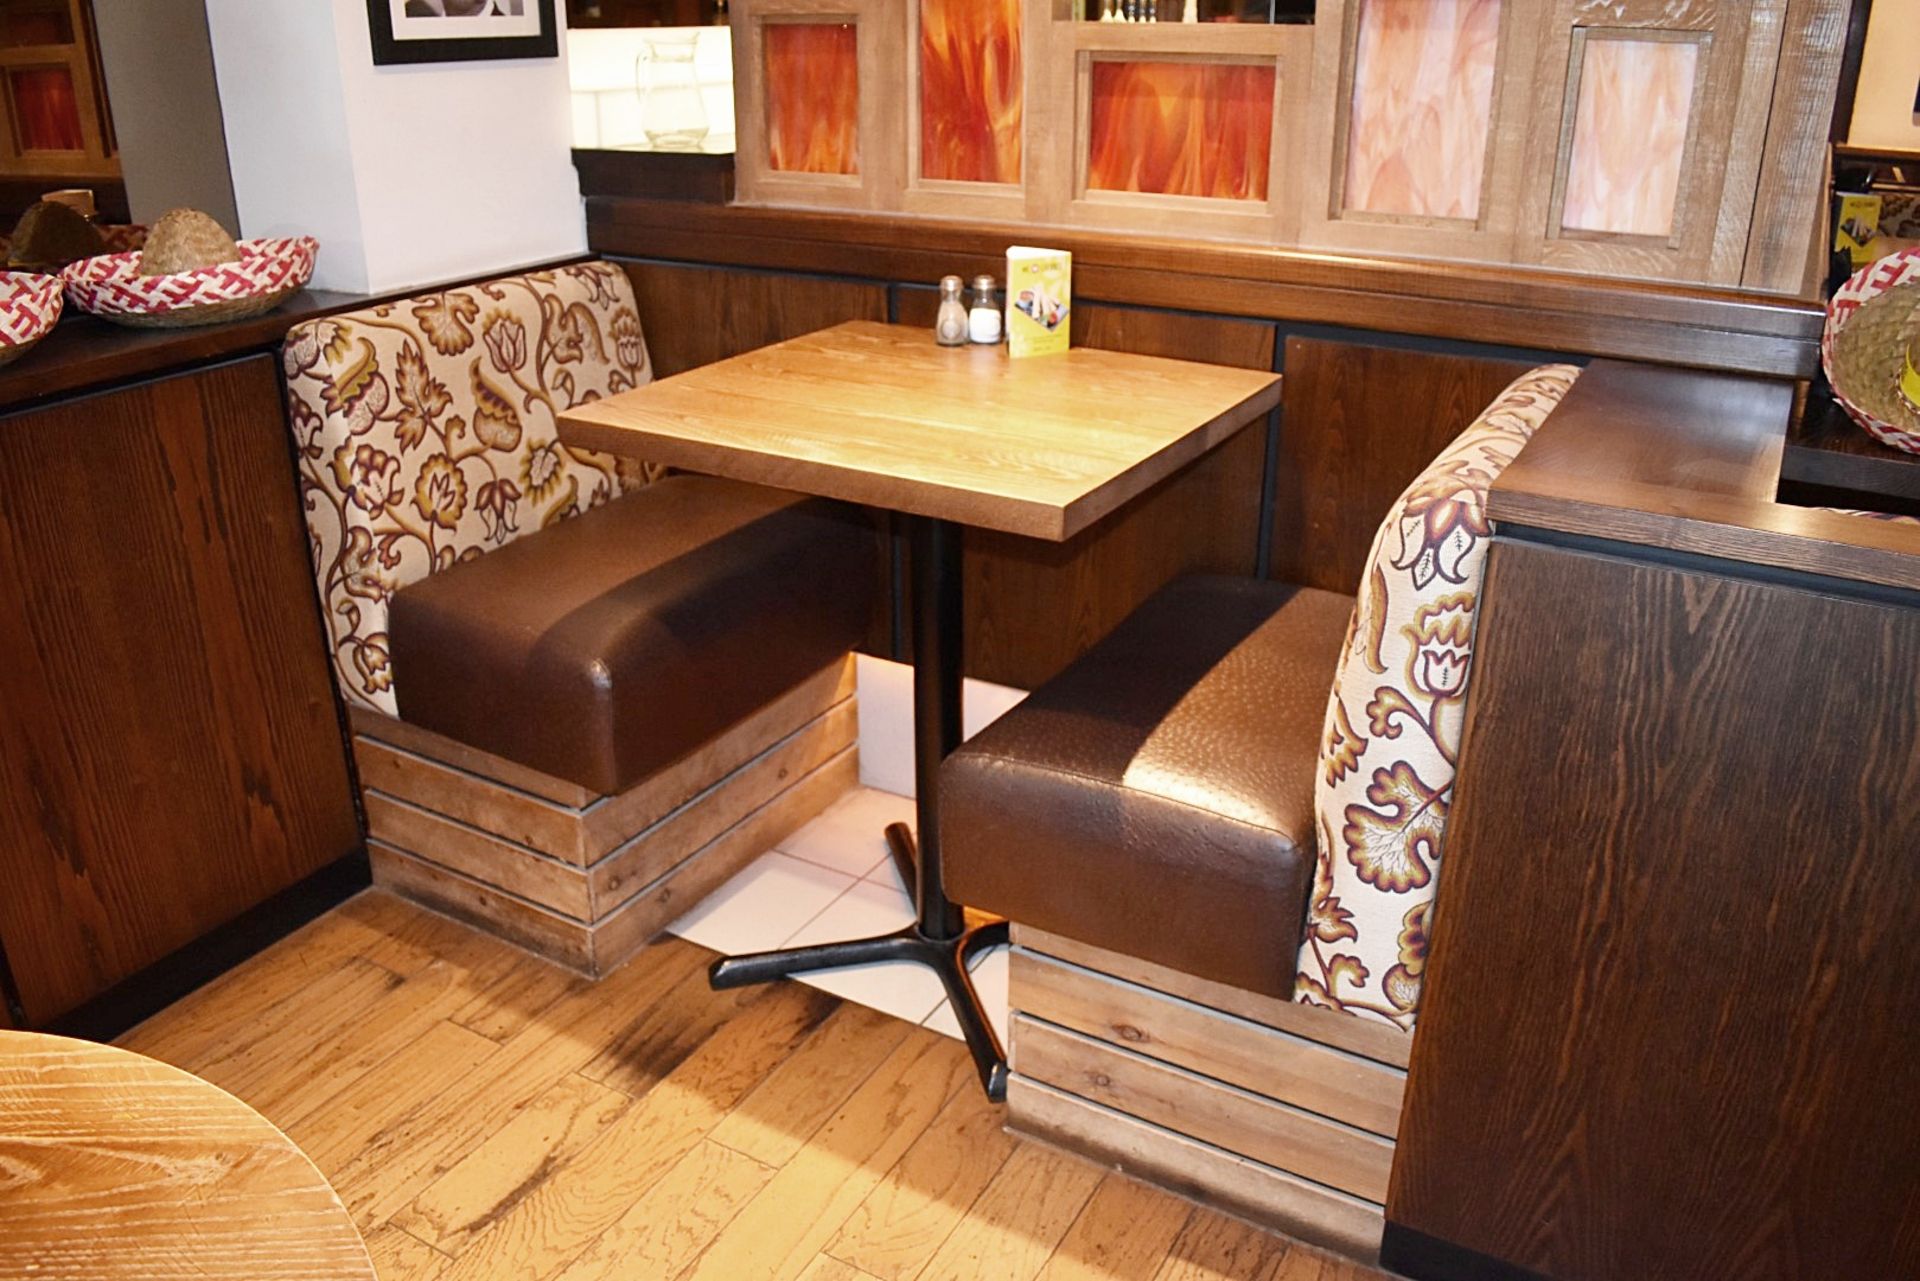 15-Pieces Of Restaurant Booth Seating Of Varying Length - Image 4 of 22